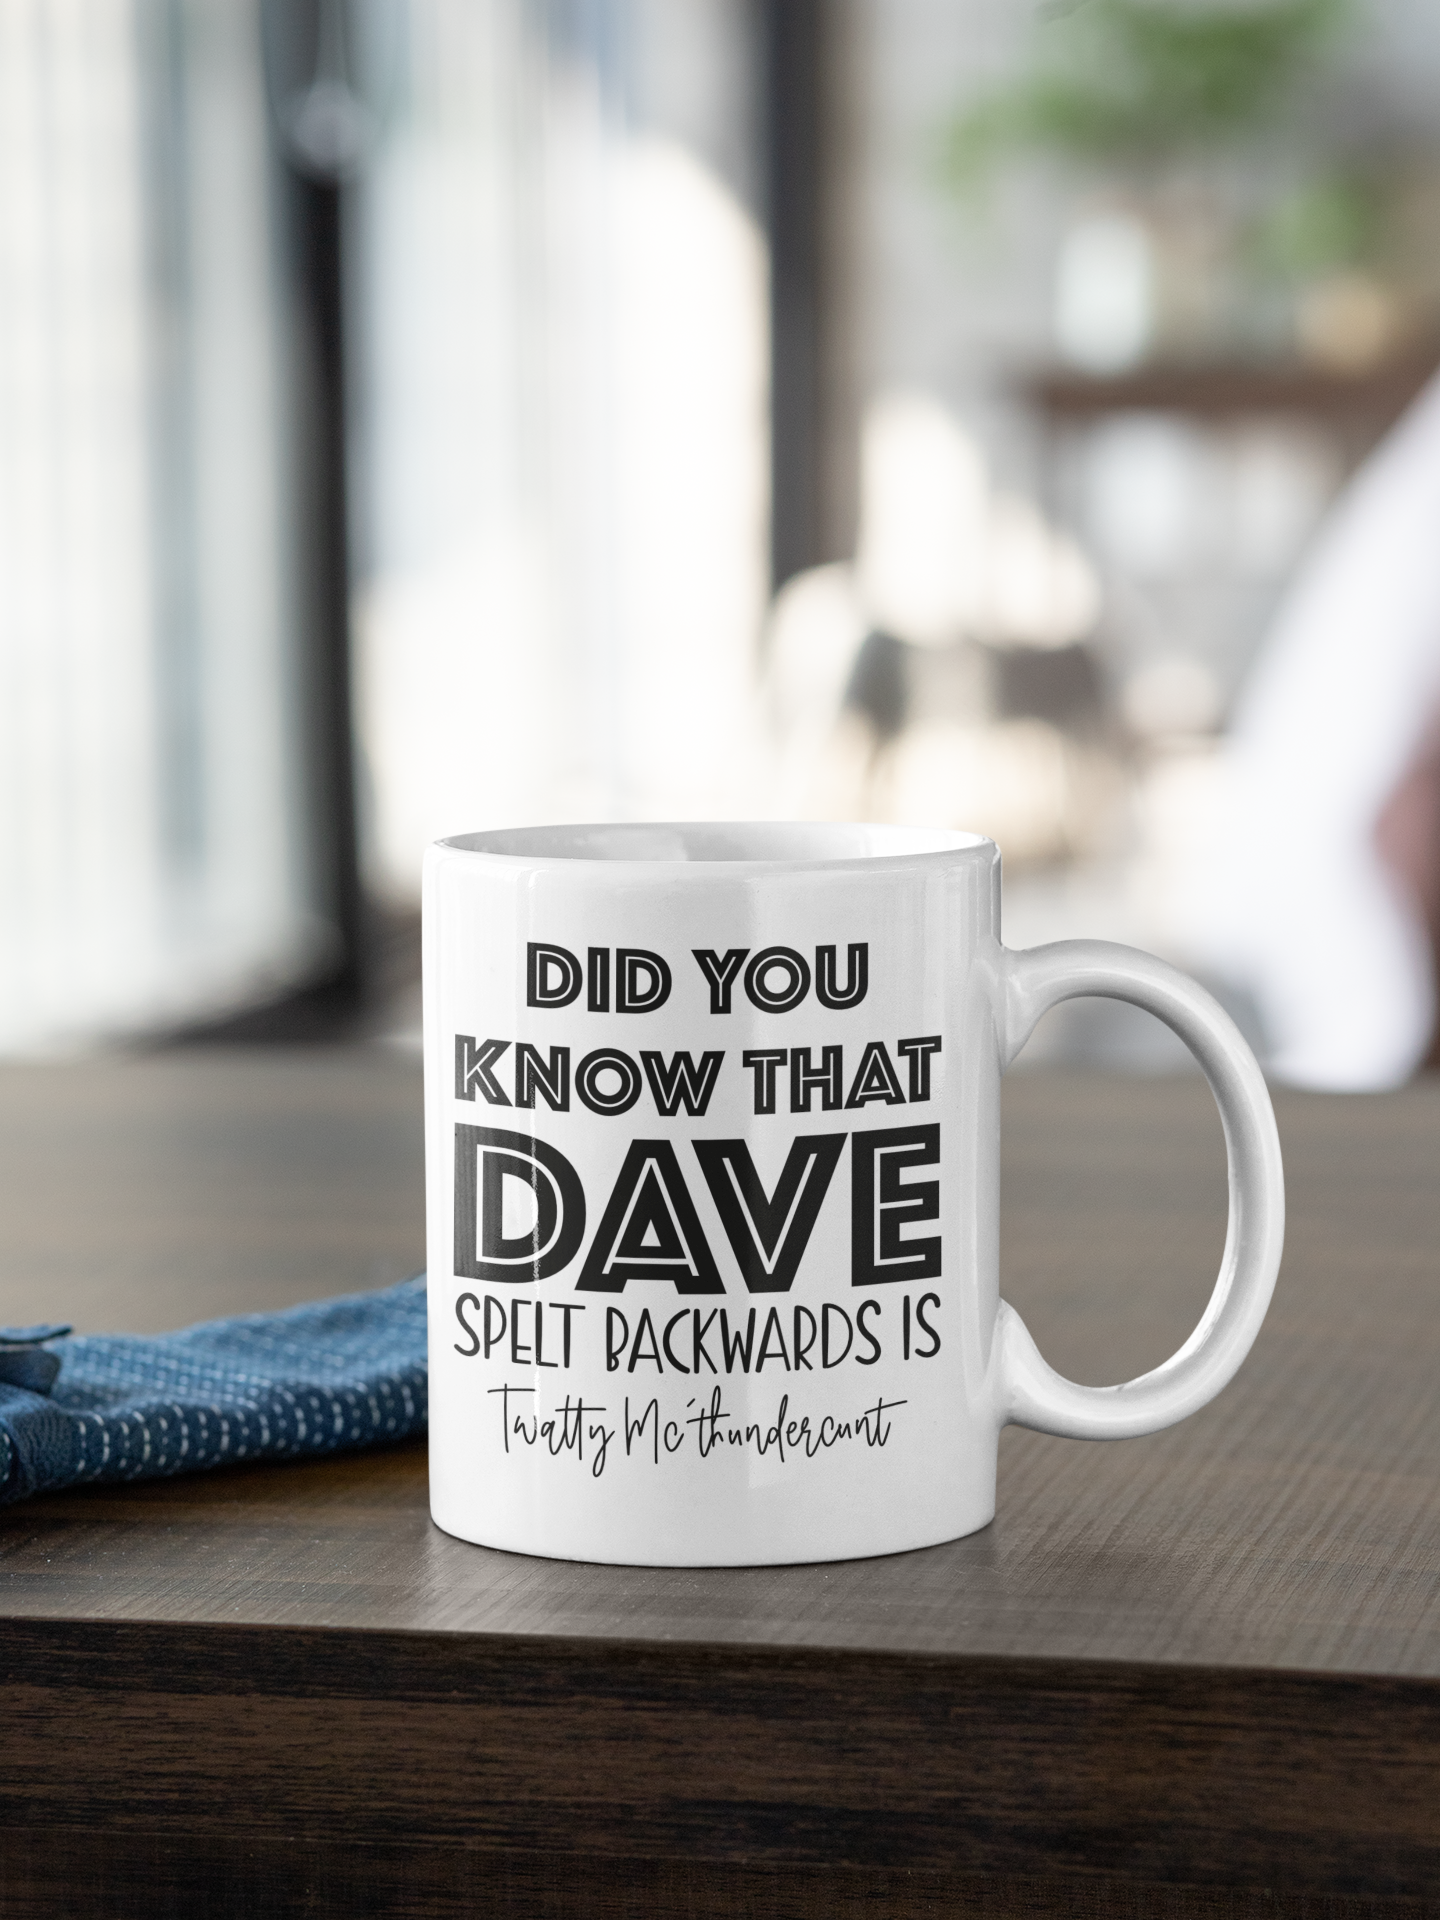 White mug with the quote did you know that dave spelt backwards is twatty mcthundercunt. Printed in black ink.